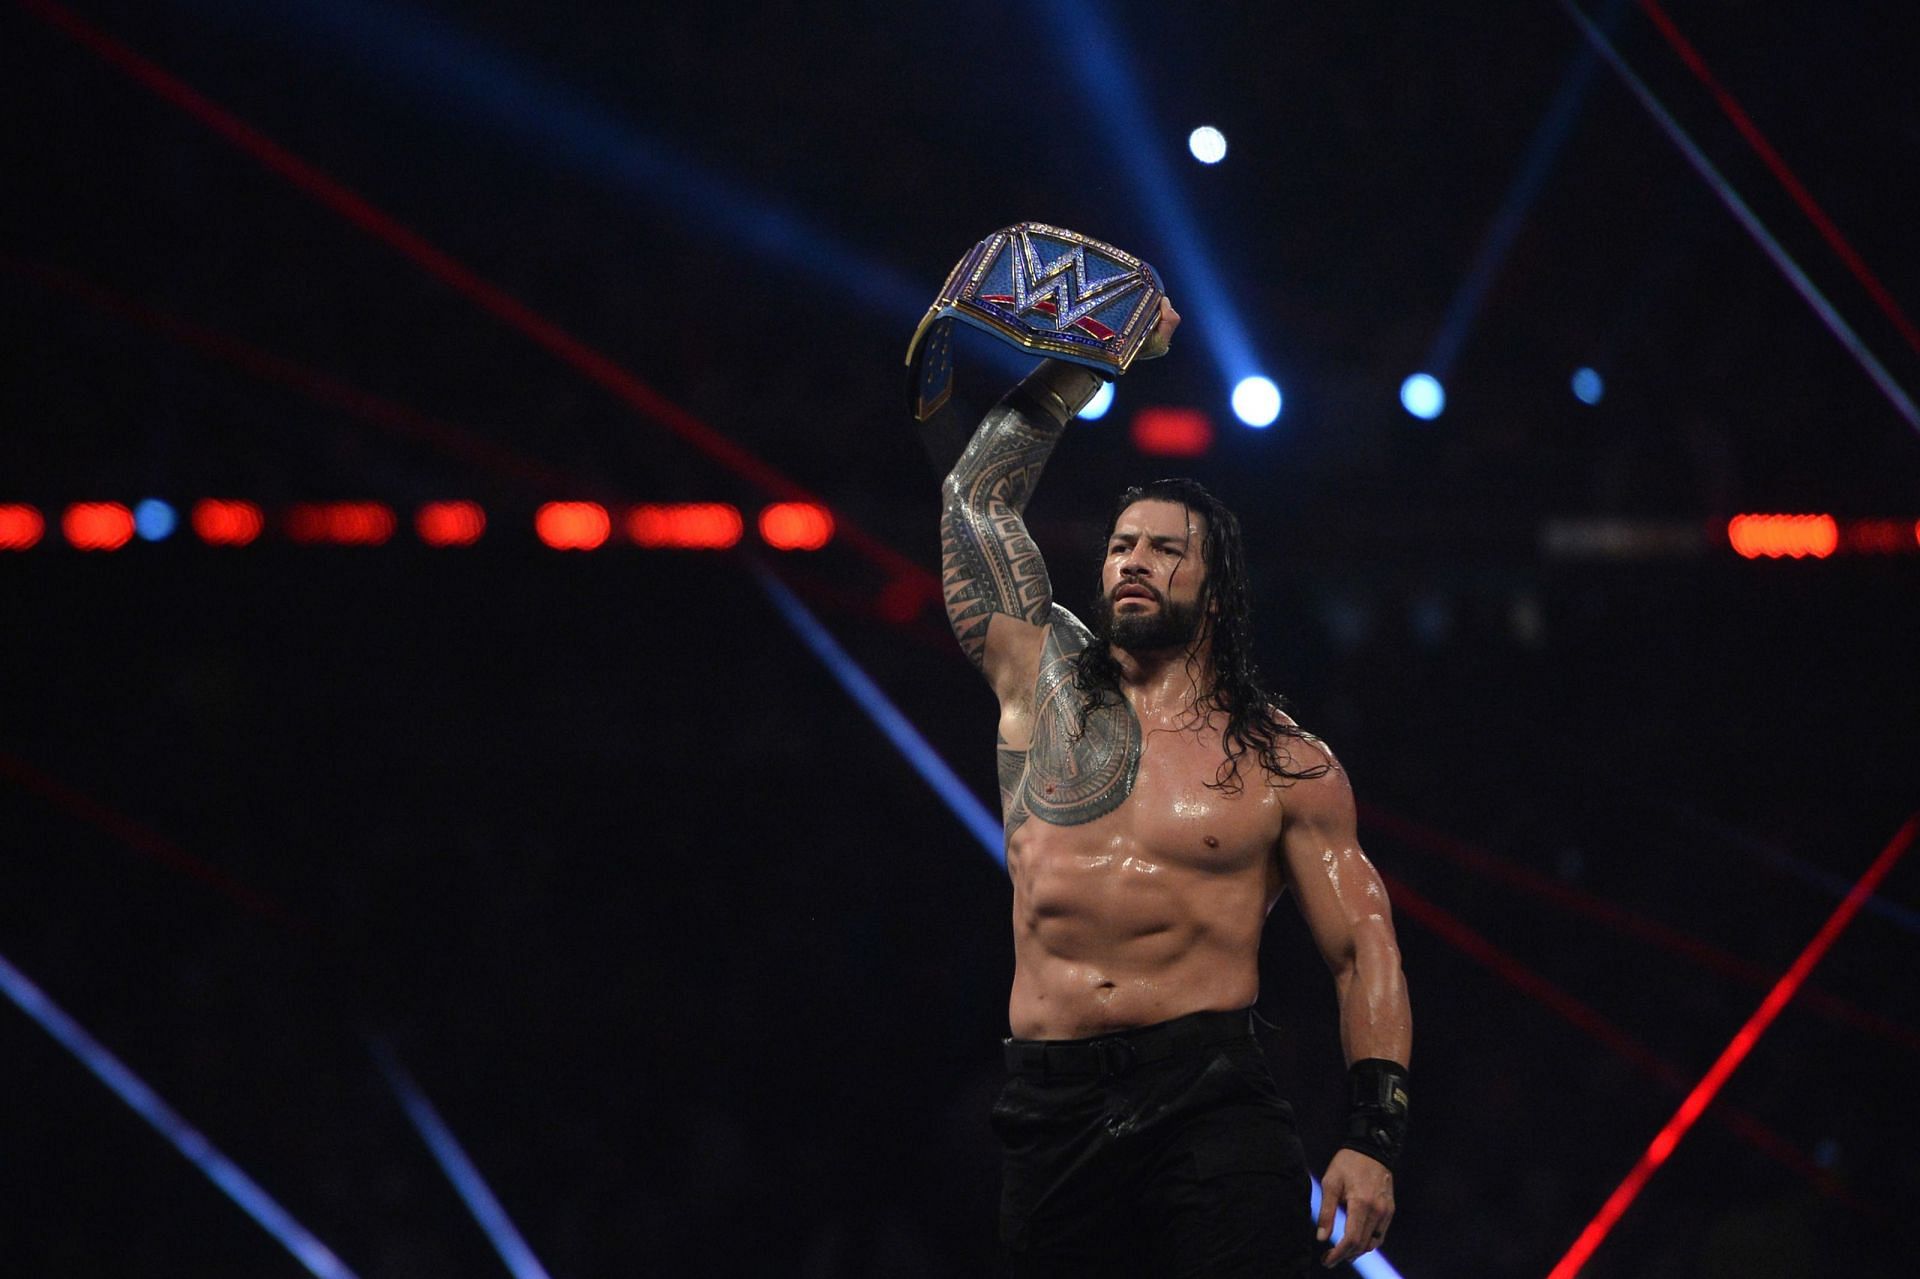 Roman Reigns is aiming for a big win at WrestleMania 38